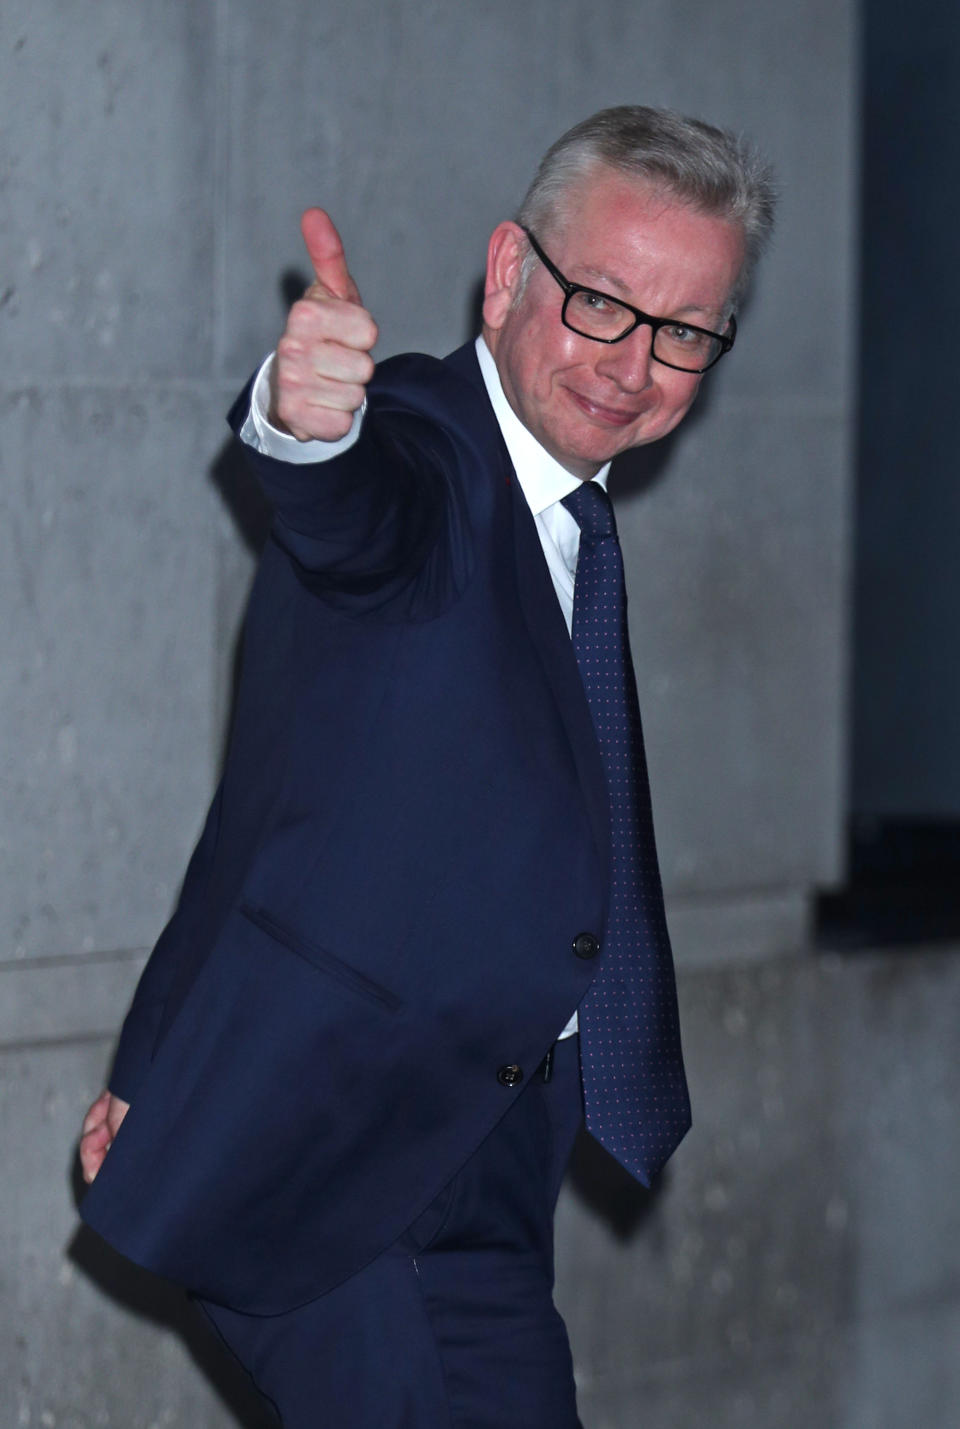 Conservative party leadership contender Michael Gove leaves BBC Broadcasting House in London after a Live TV debate with Tory leadership hopefuls.